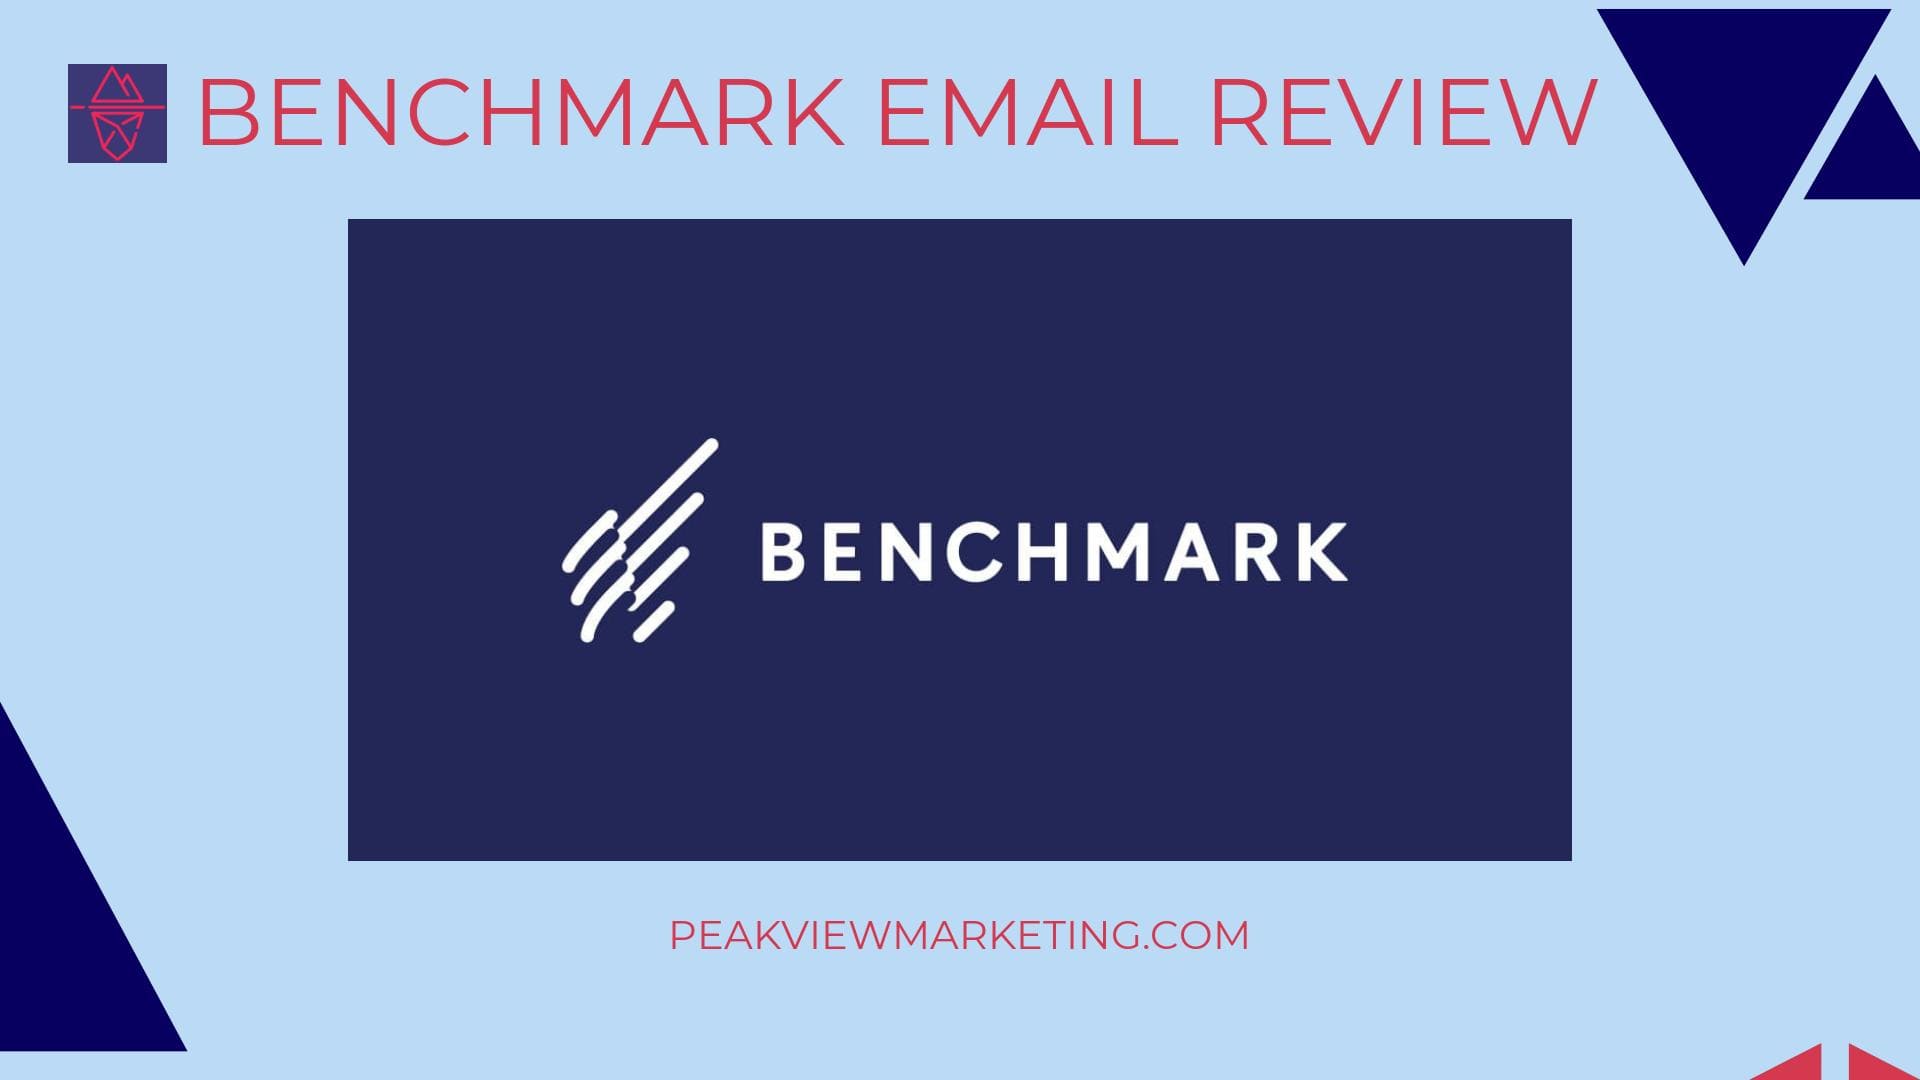 Benchmark Email Review Image